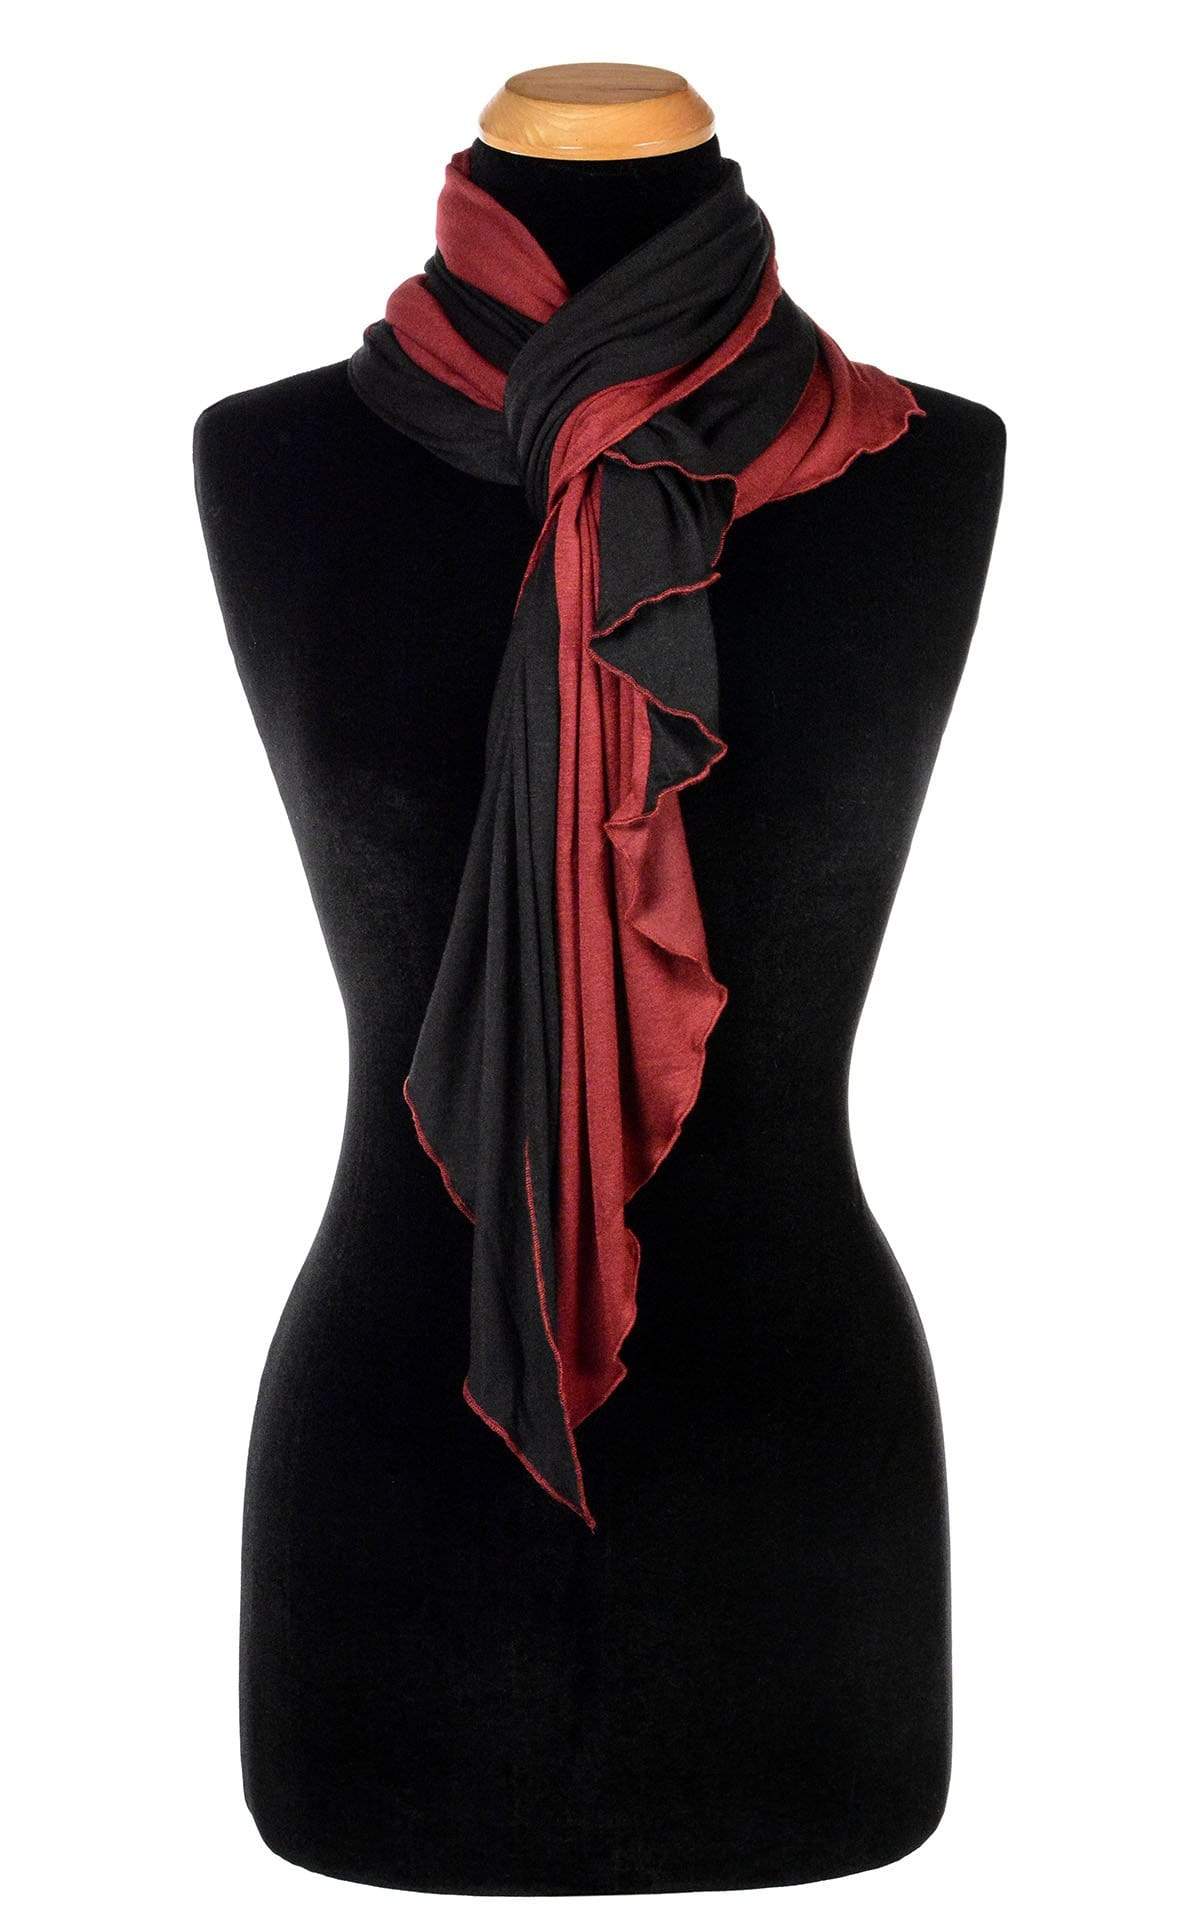 Ladies Large Handkerchief Scarf, Wrap jersey knit fabric on a mannequin | Abyss W/ Blood Mooni, black and red| Handmade in Seattle WA | Pandemonium Millinery